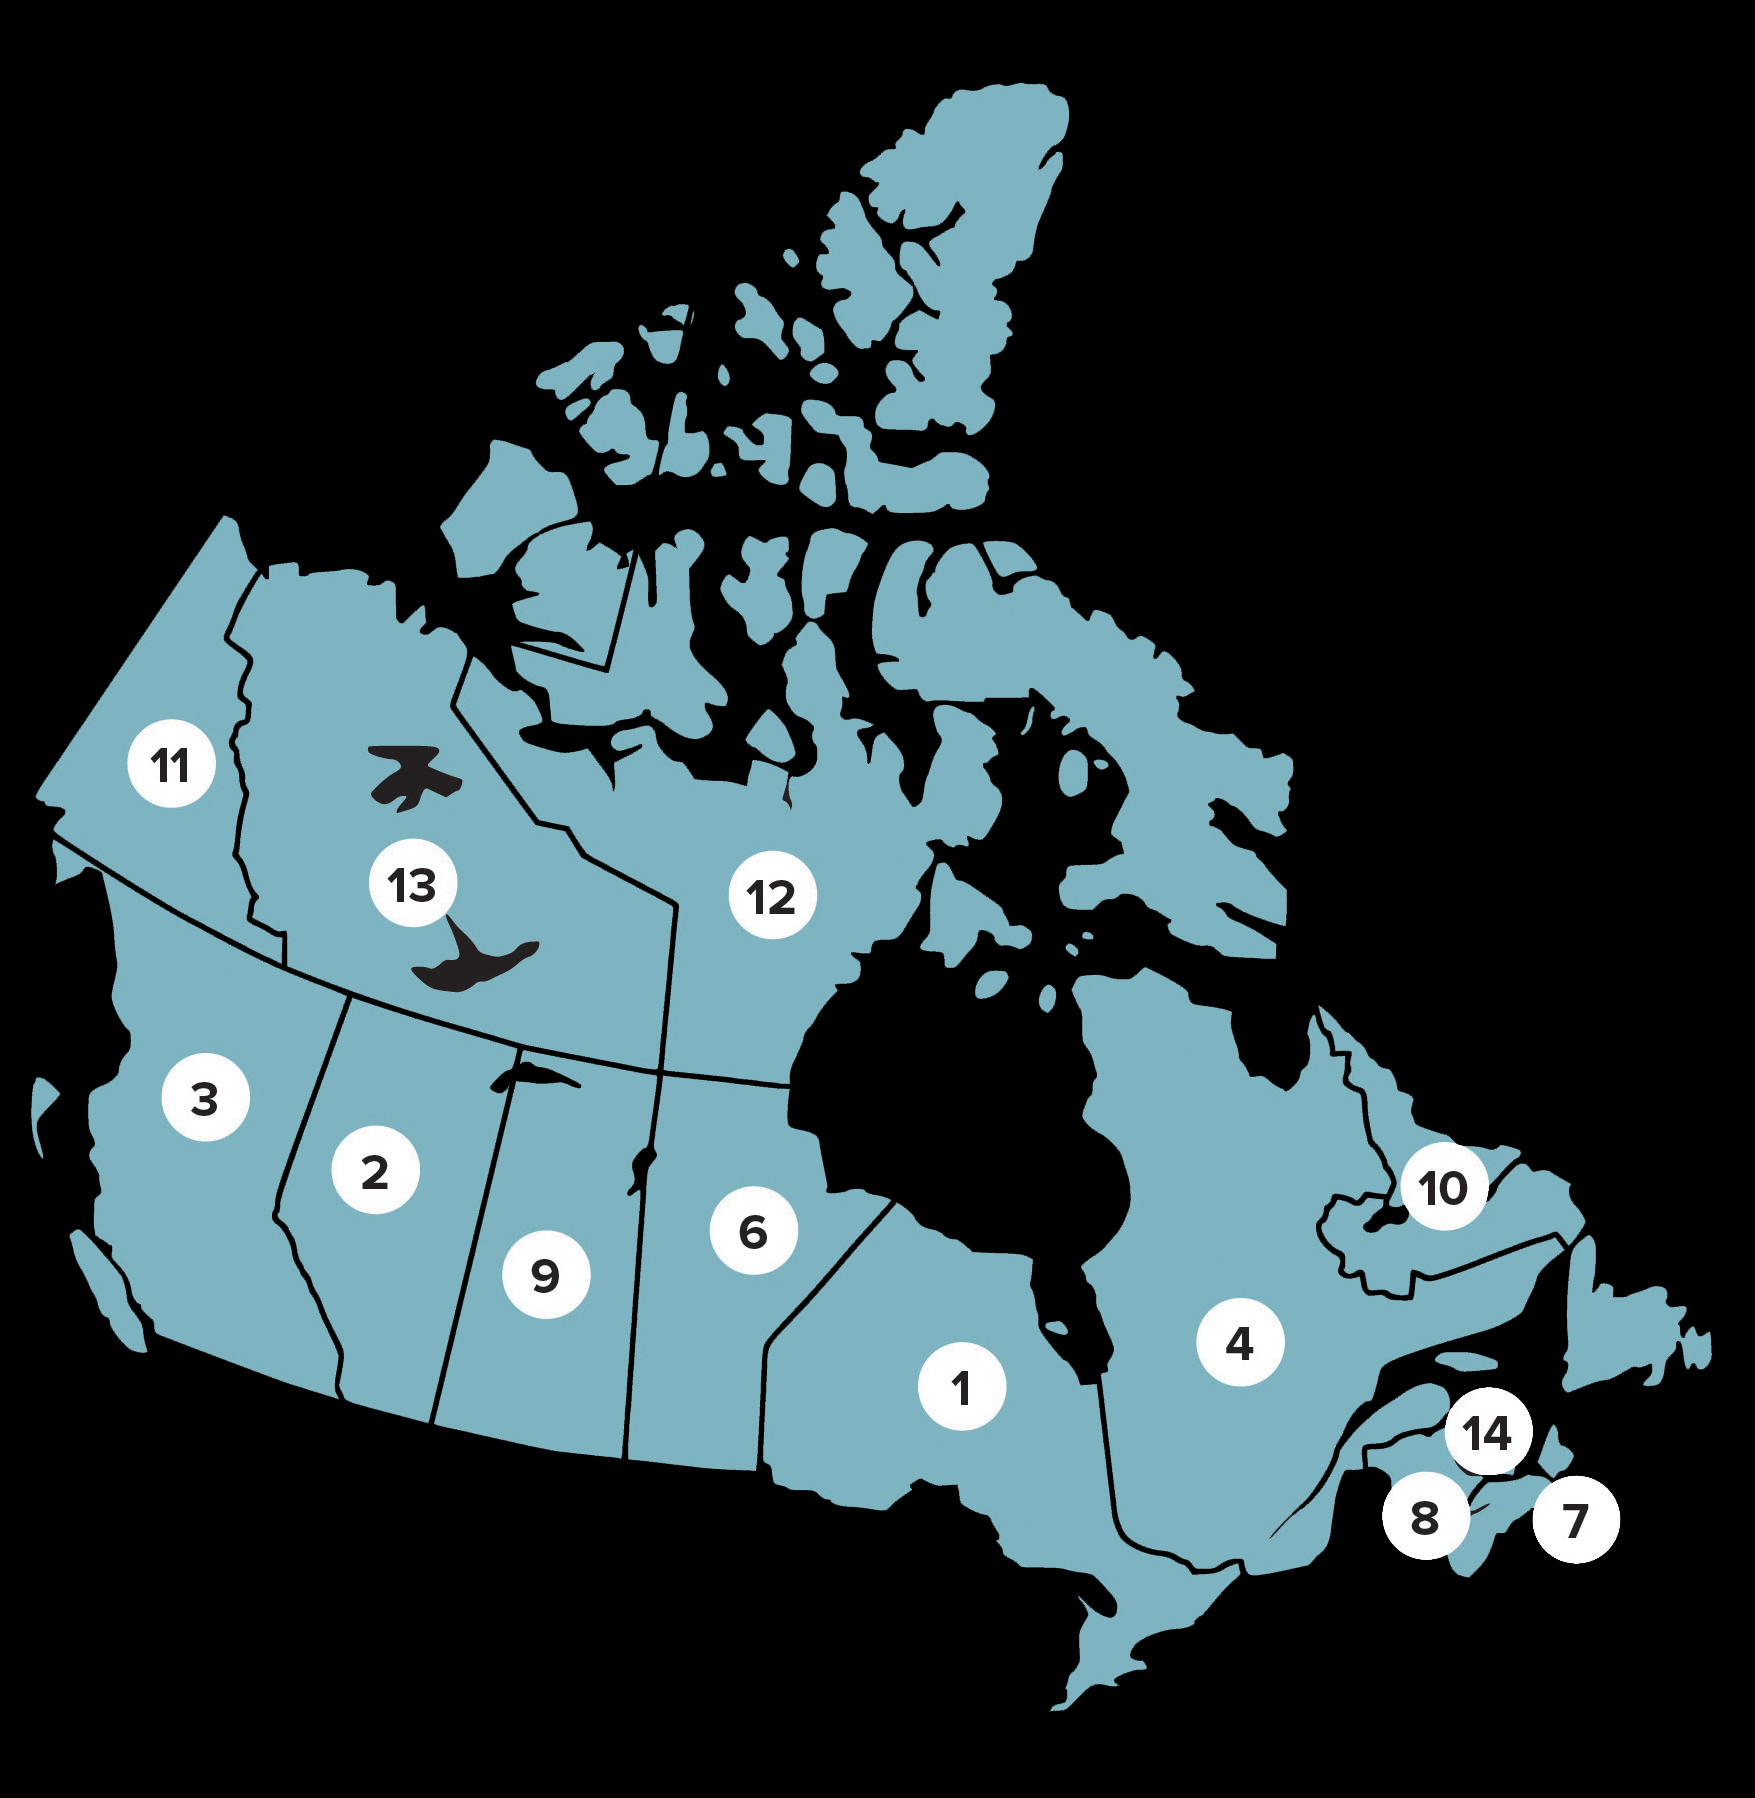 Map of Canada shows the percentage of accepted complaints for each province and territory